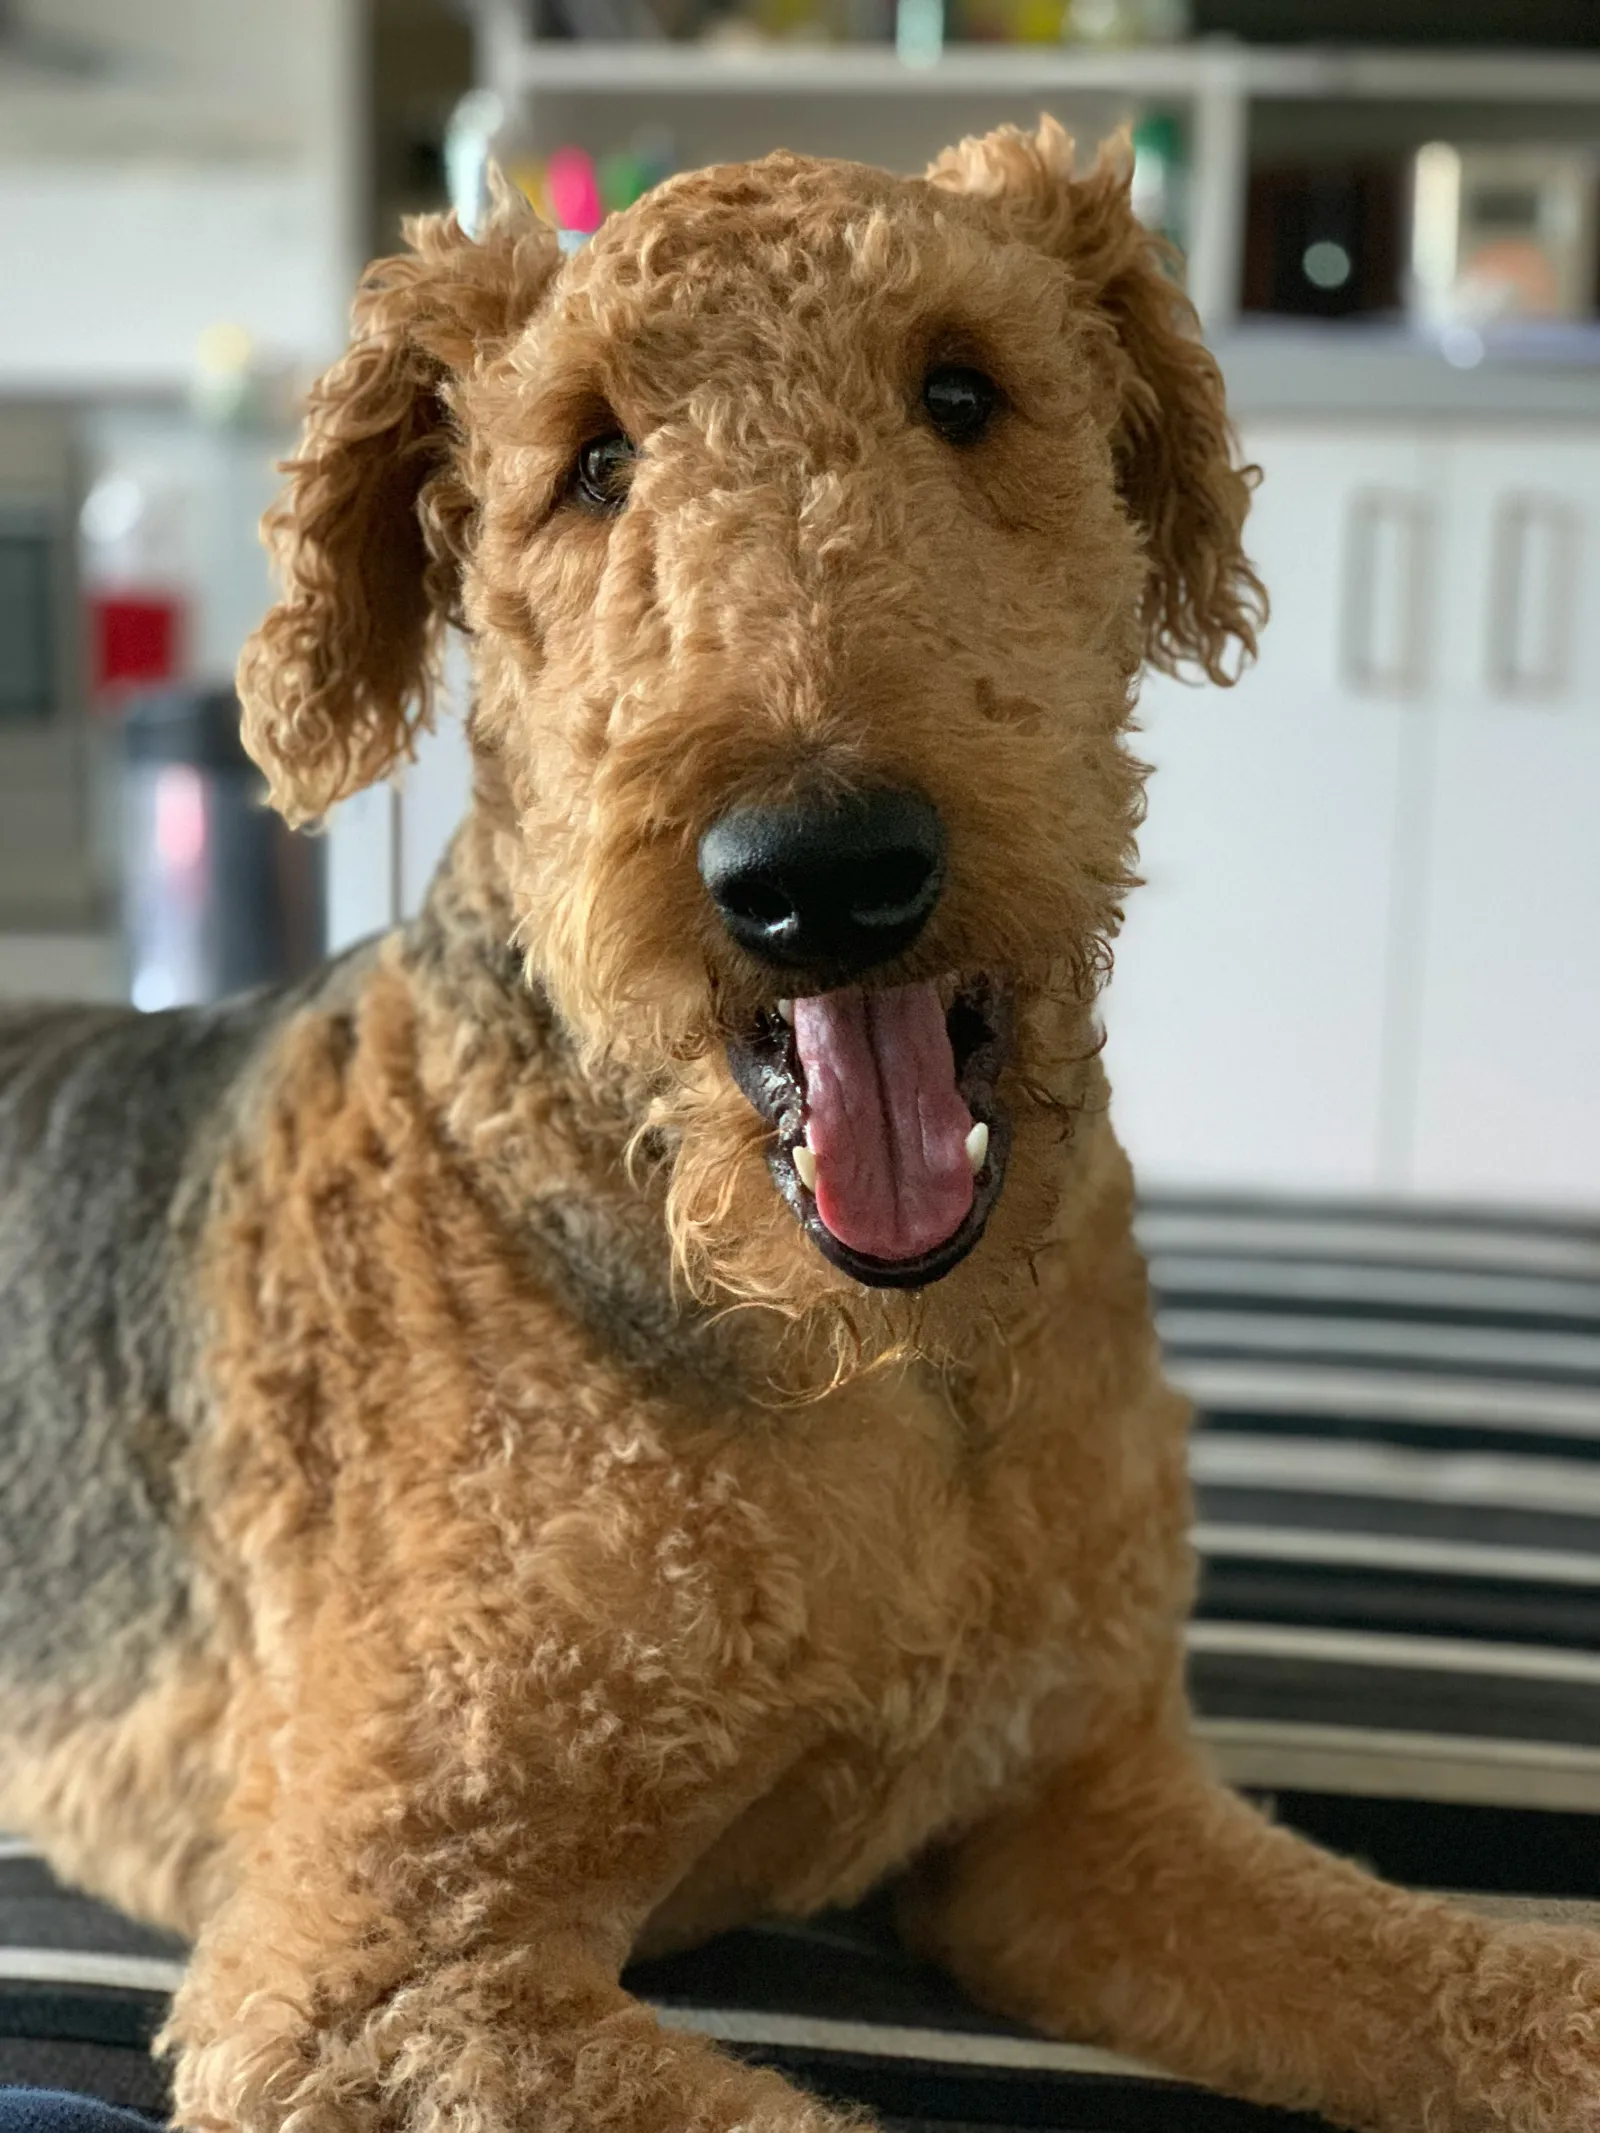 an airedale terrier, a hypoallergenic dog breed, with its mouth open